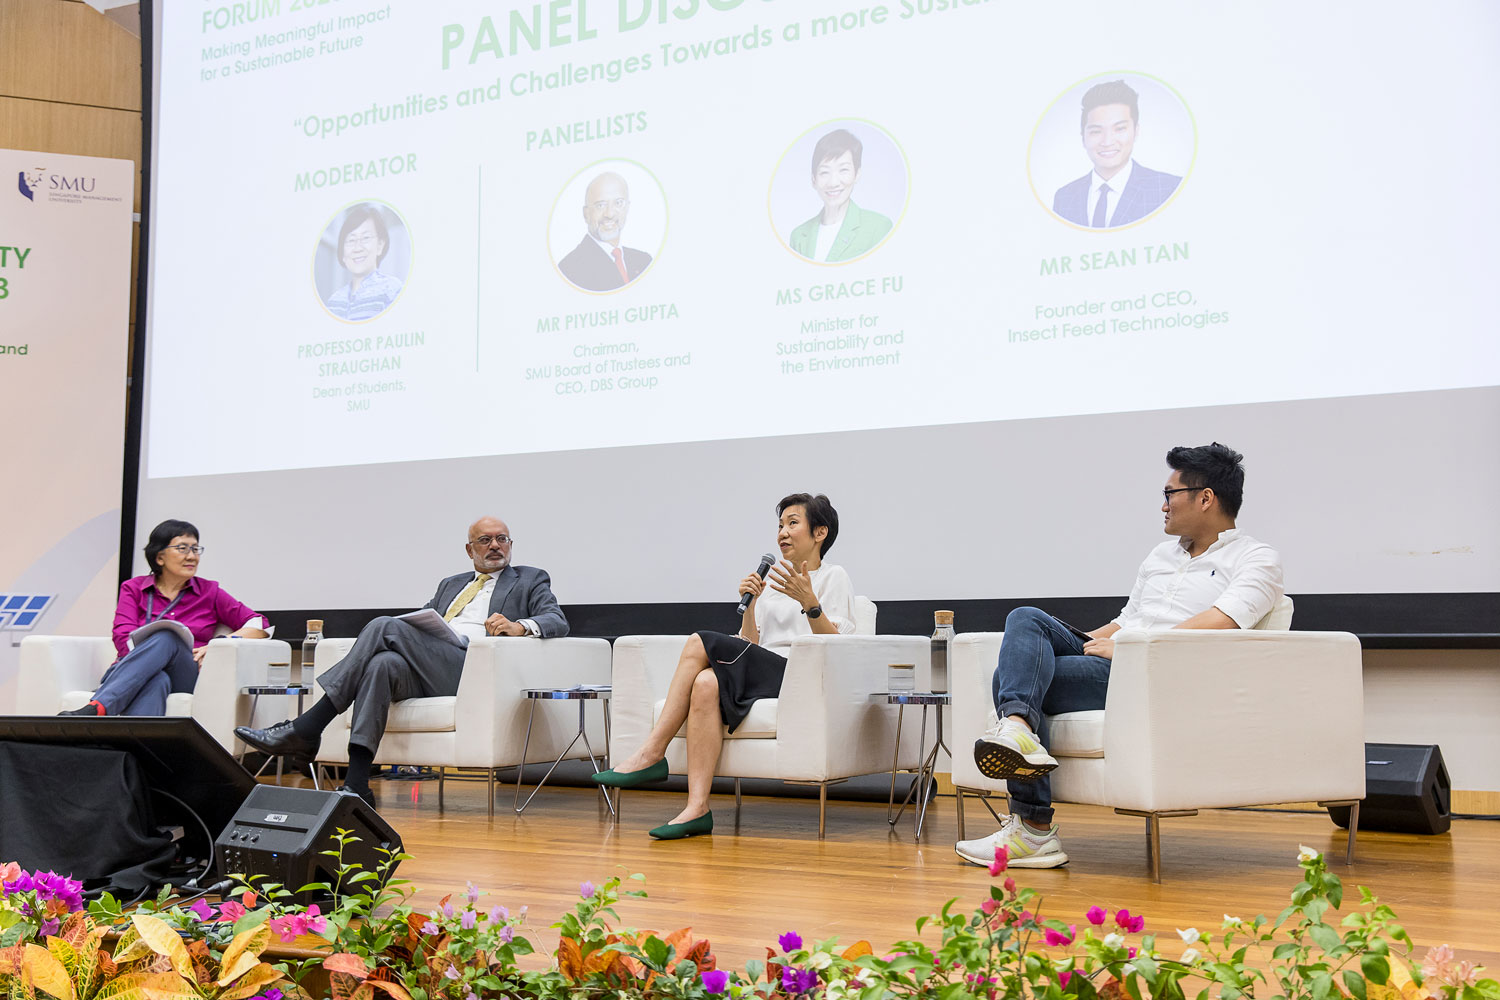 (L-R) Panel Moderator – SMU Dean of Students Prof Paulin Straughan and panellists - SMU Chairman Mr Piyush Gupta, Minister for Sustainability and the Environment Ms Grace Fu and Founder &amp;amp; CEO of Insect Feed Technologies Mr Sean Tan.